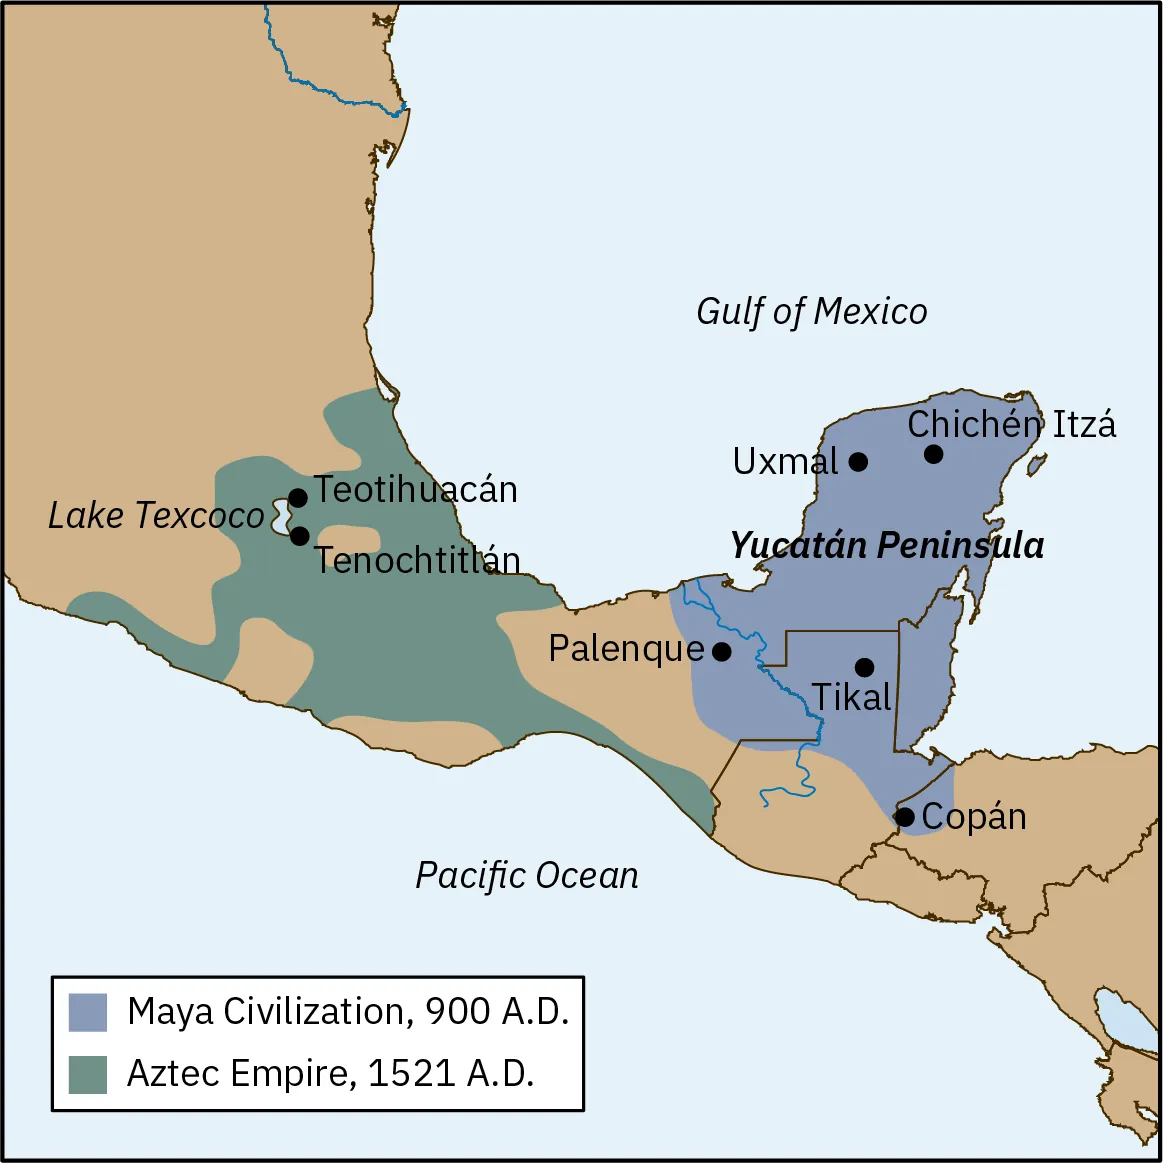 Map depicting the ranges of the Maya Civilization, circa 900 CE, and the Aztec Empire, circa 1521 CE. The Maya Civilization occupies the entirety of the Yucatán Peninsula in Central America, and includes the cities Copan, Tikal, Palenque, Uxmal, and Chichen Itza. The Aztec Empire occupies a portion of Central America north of the Yucatan Peninsula, and includes the cities Teotihuacan and Tenochtitlan, as well as Lake Texcoco. The two ranges cover approximately equal areas.